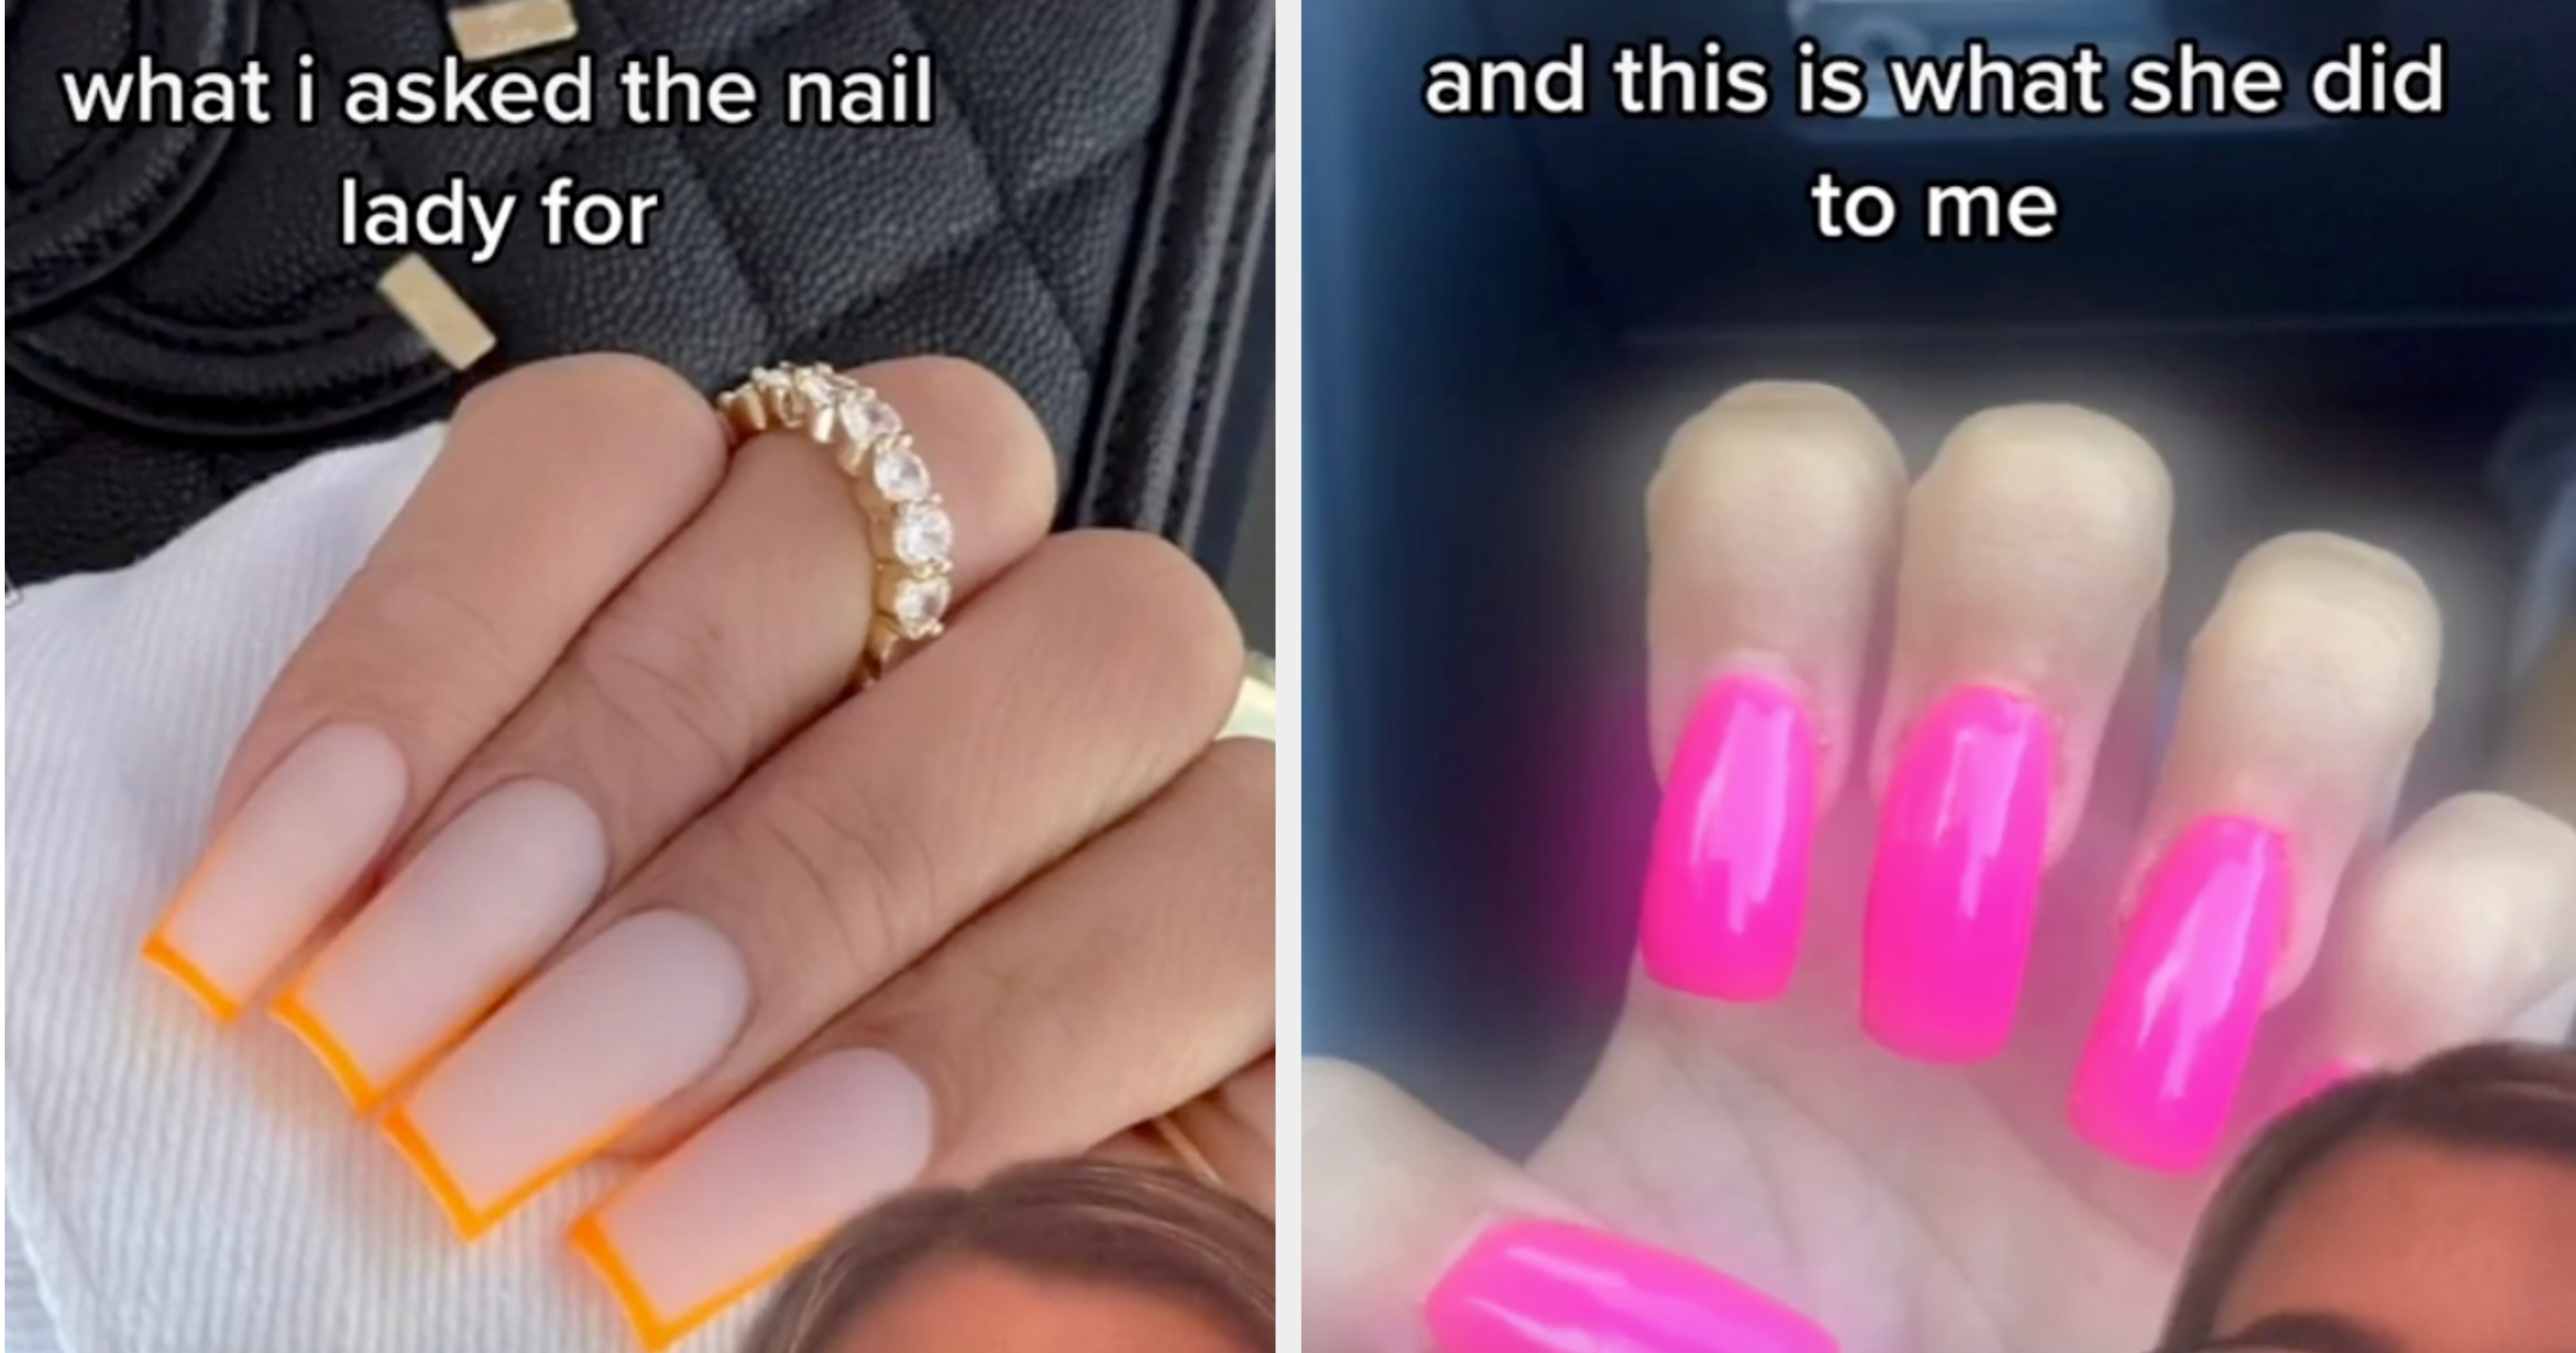 The Nails People Asked For Vs What They Got